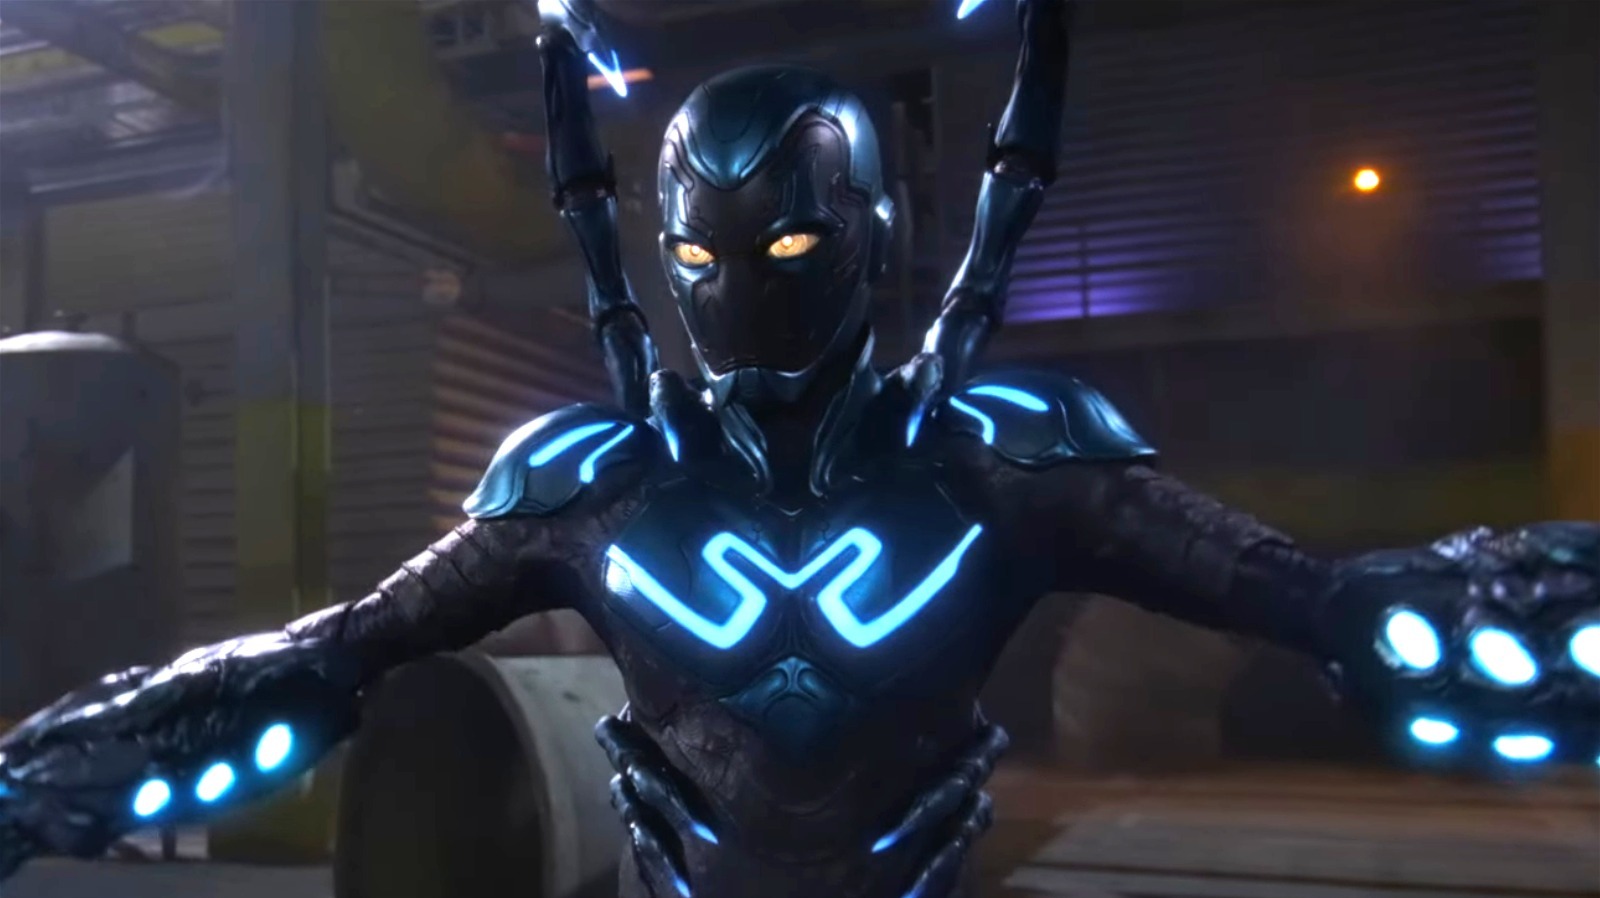 Trailer for Blue Beetle has been released online